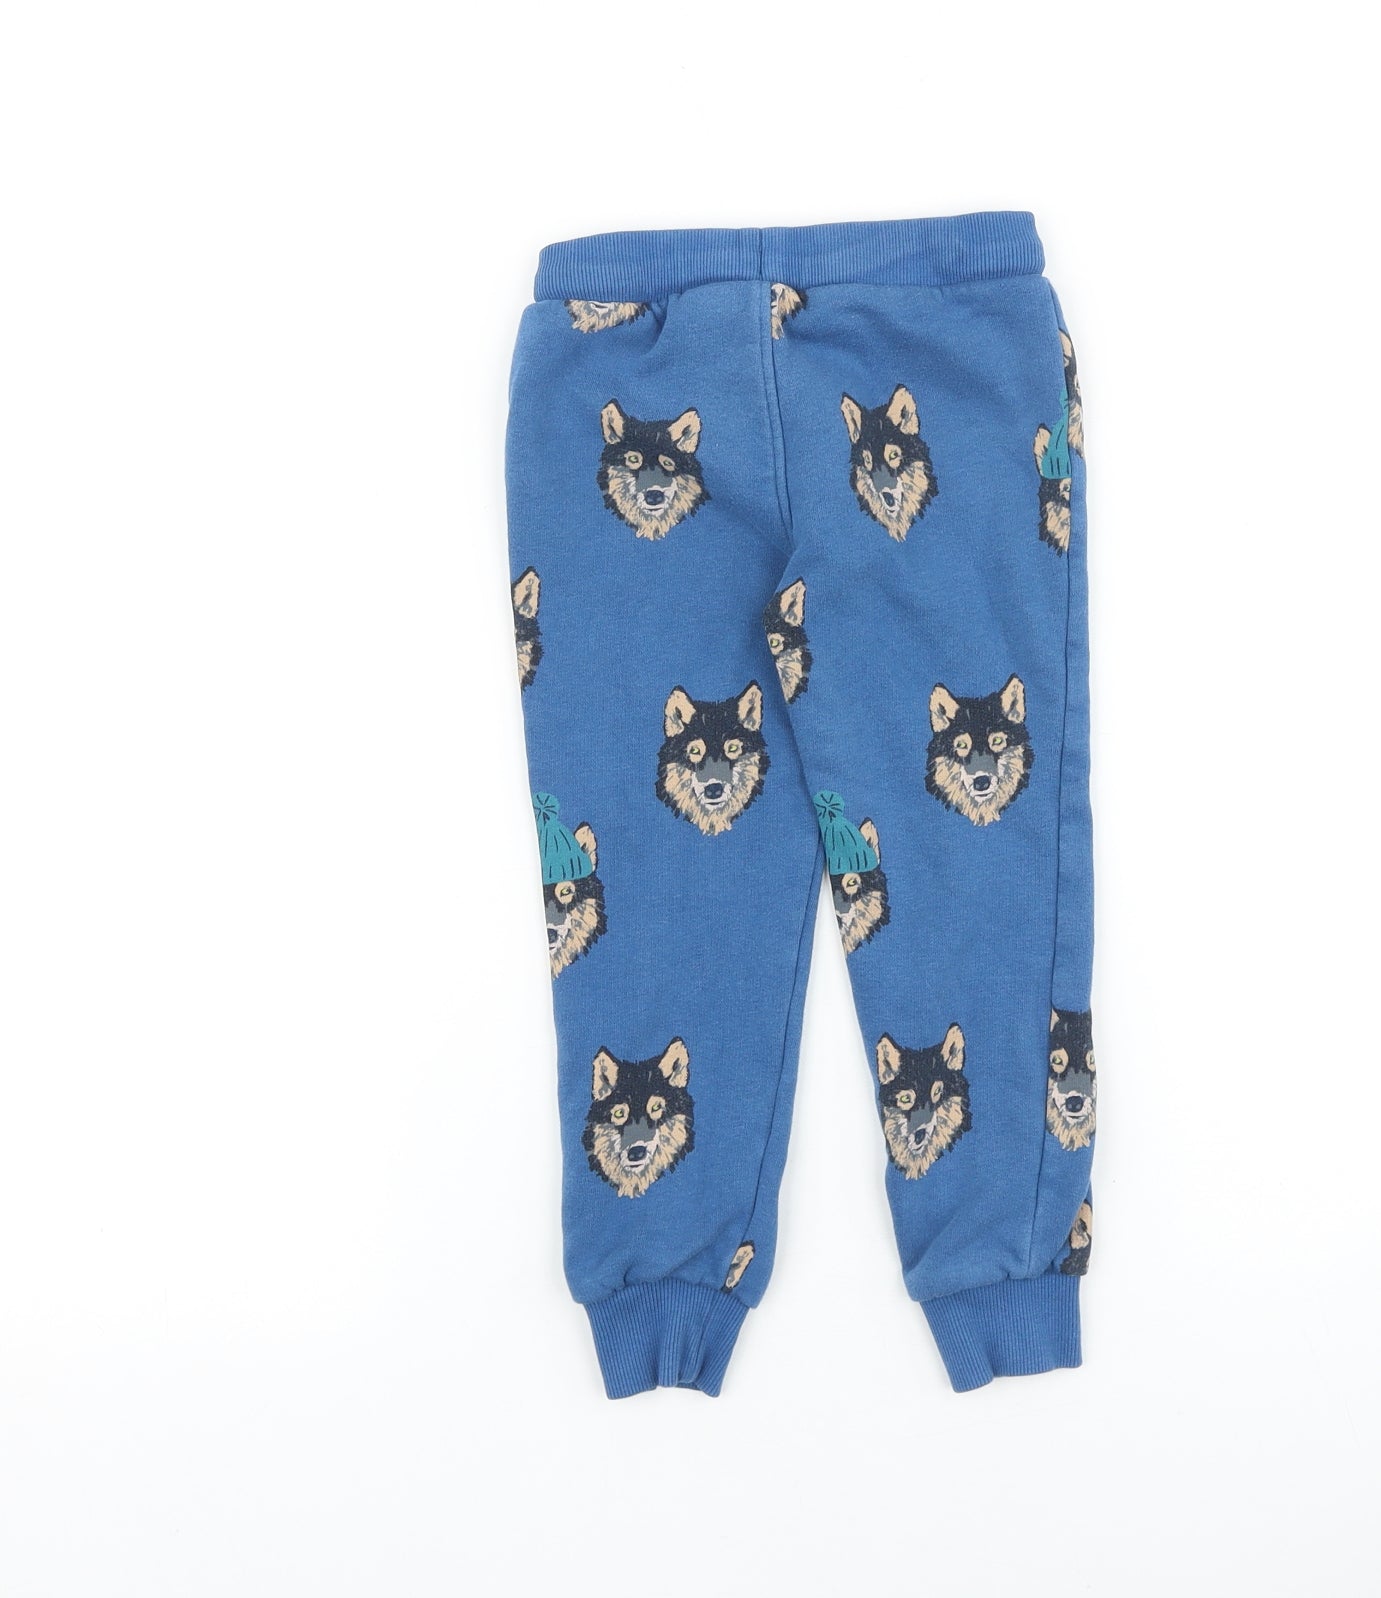 Marks and Spencer Boys Blue Geometric 100% Cotton Jogger Trousers Size 3-4 Years Regular Drawstring - Wolf